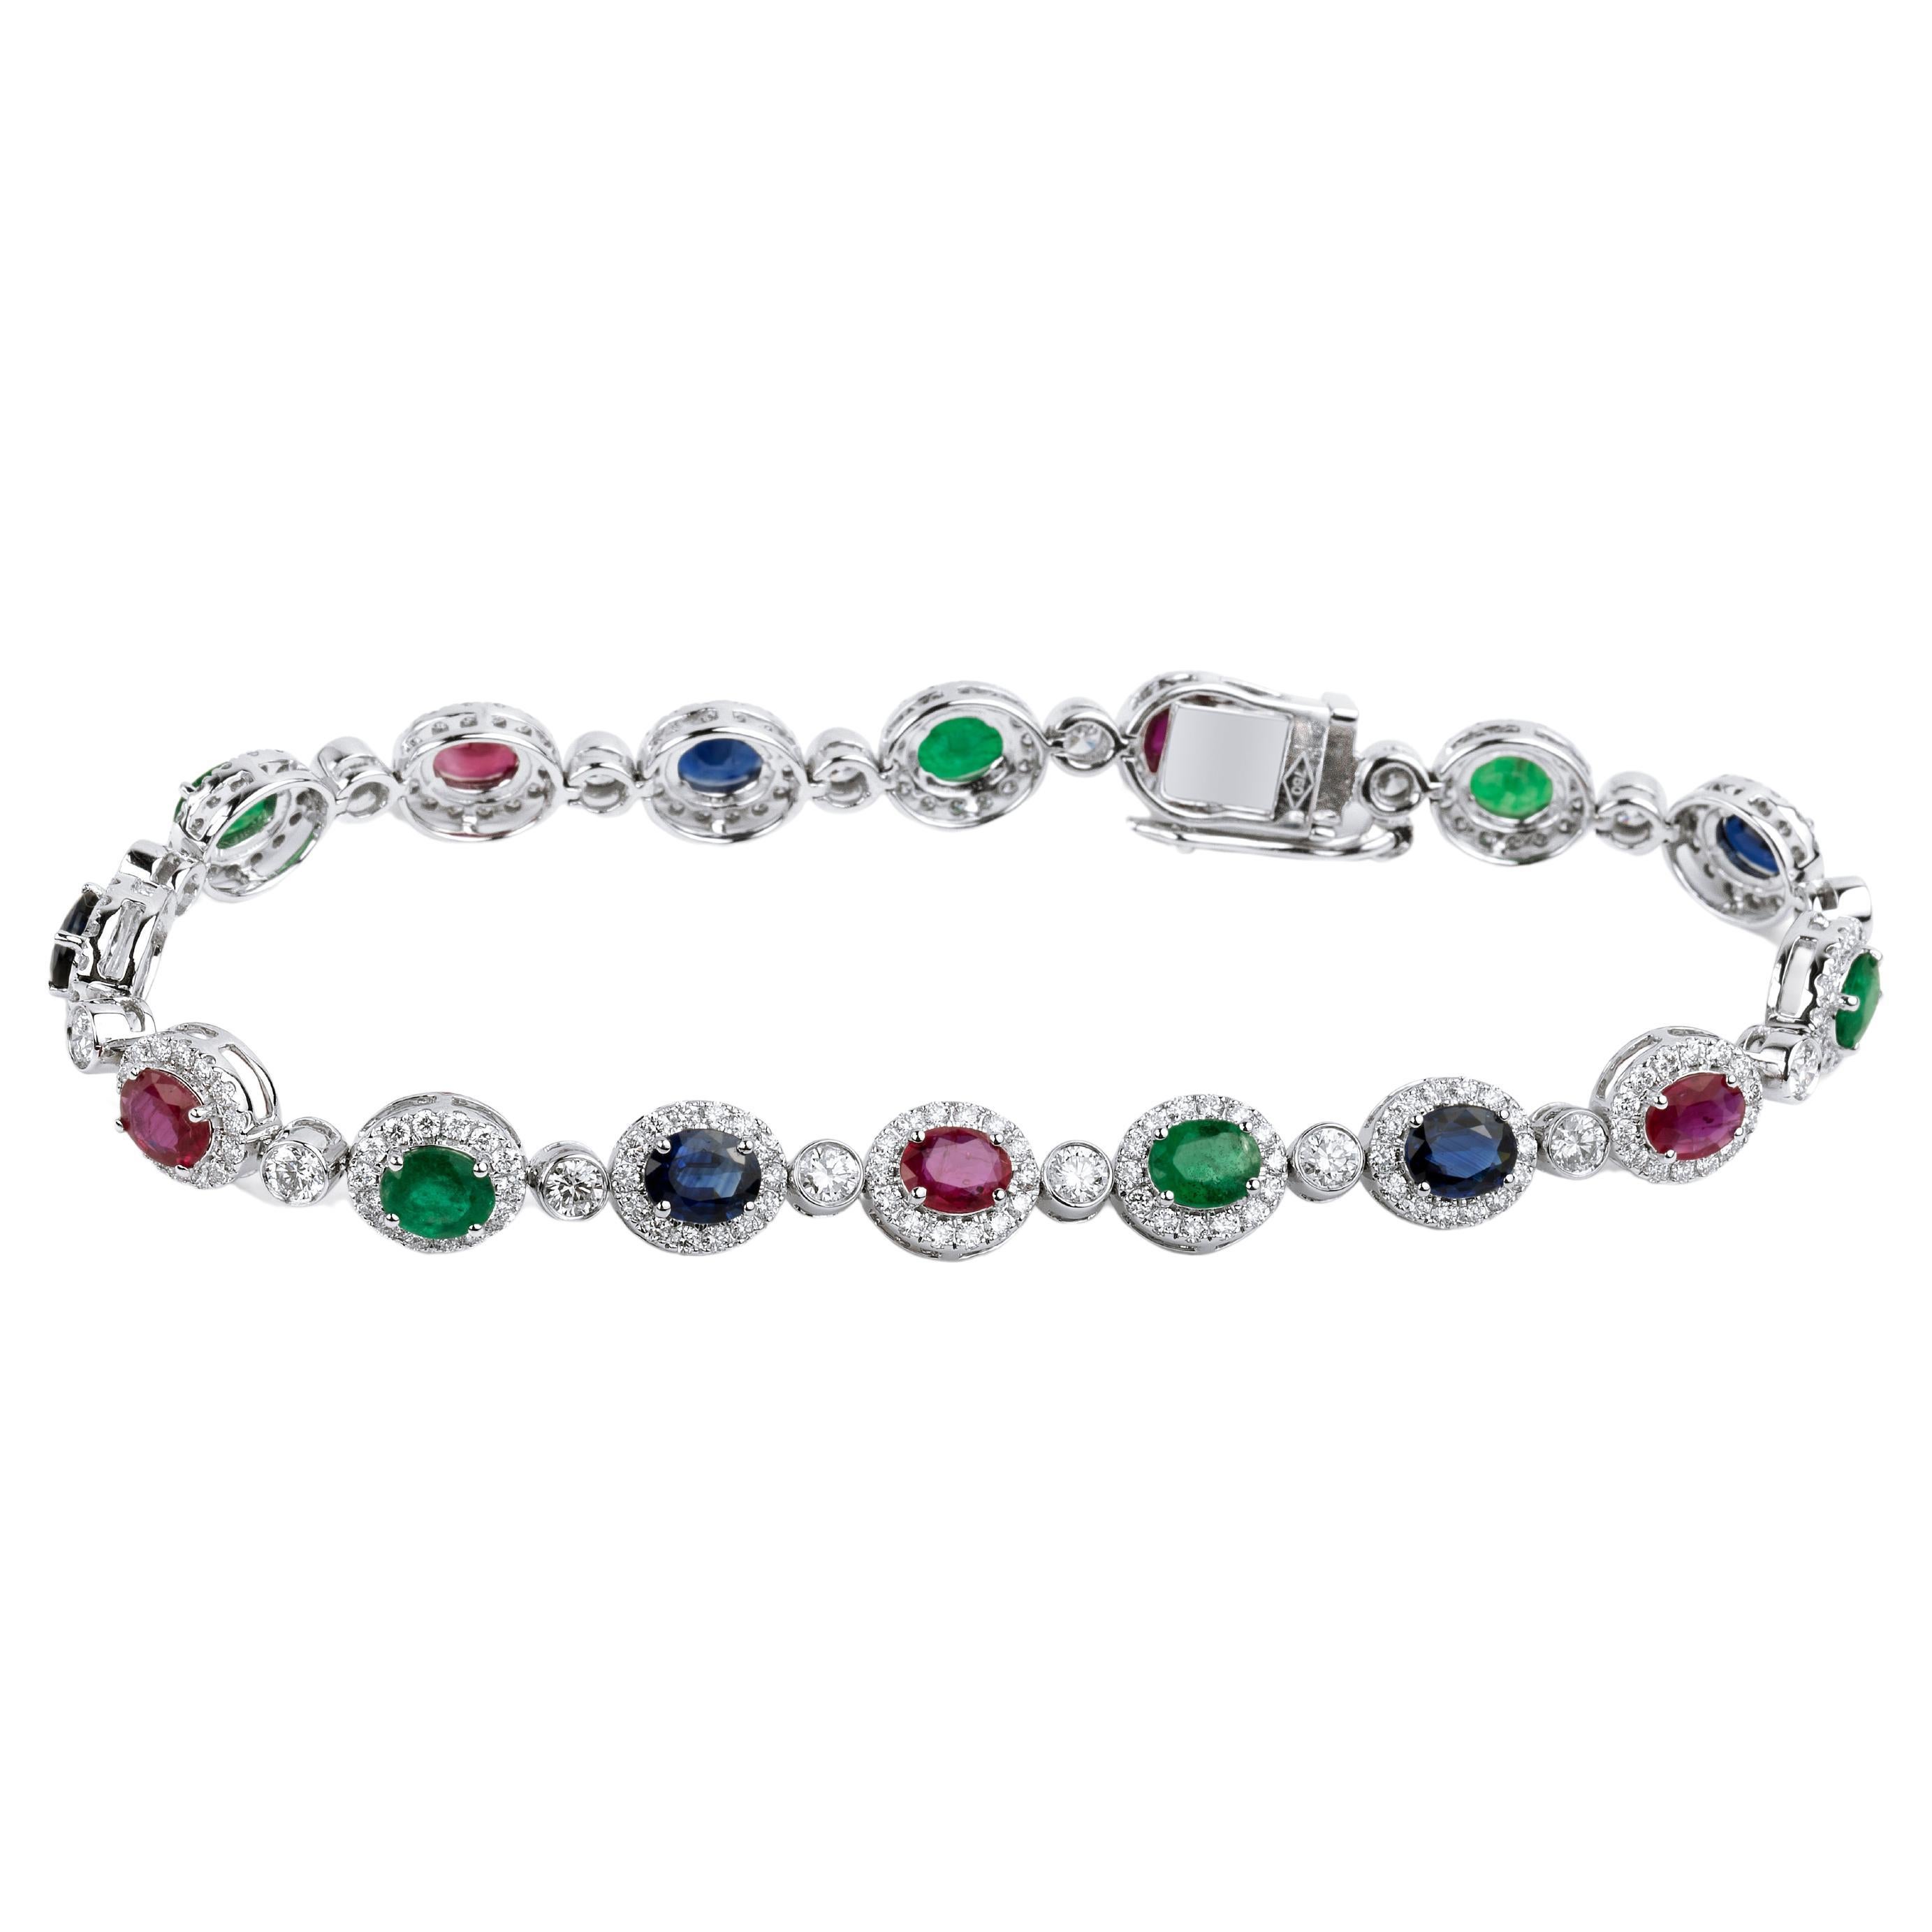 6 Ctw Oval Cut Natural Emerald, Sapphire Ruby Diamond Bracelet in 18k White Gold For Sale